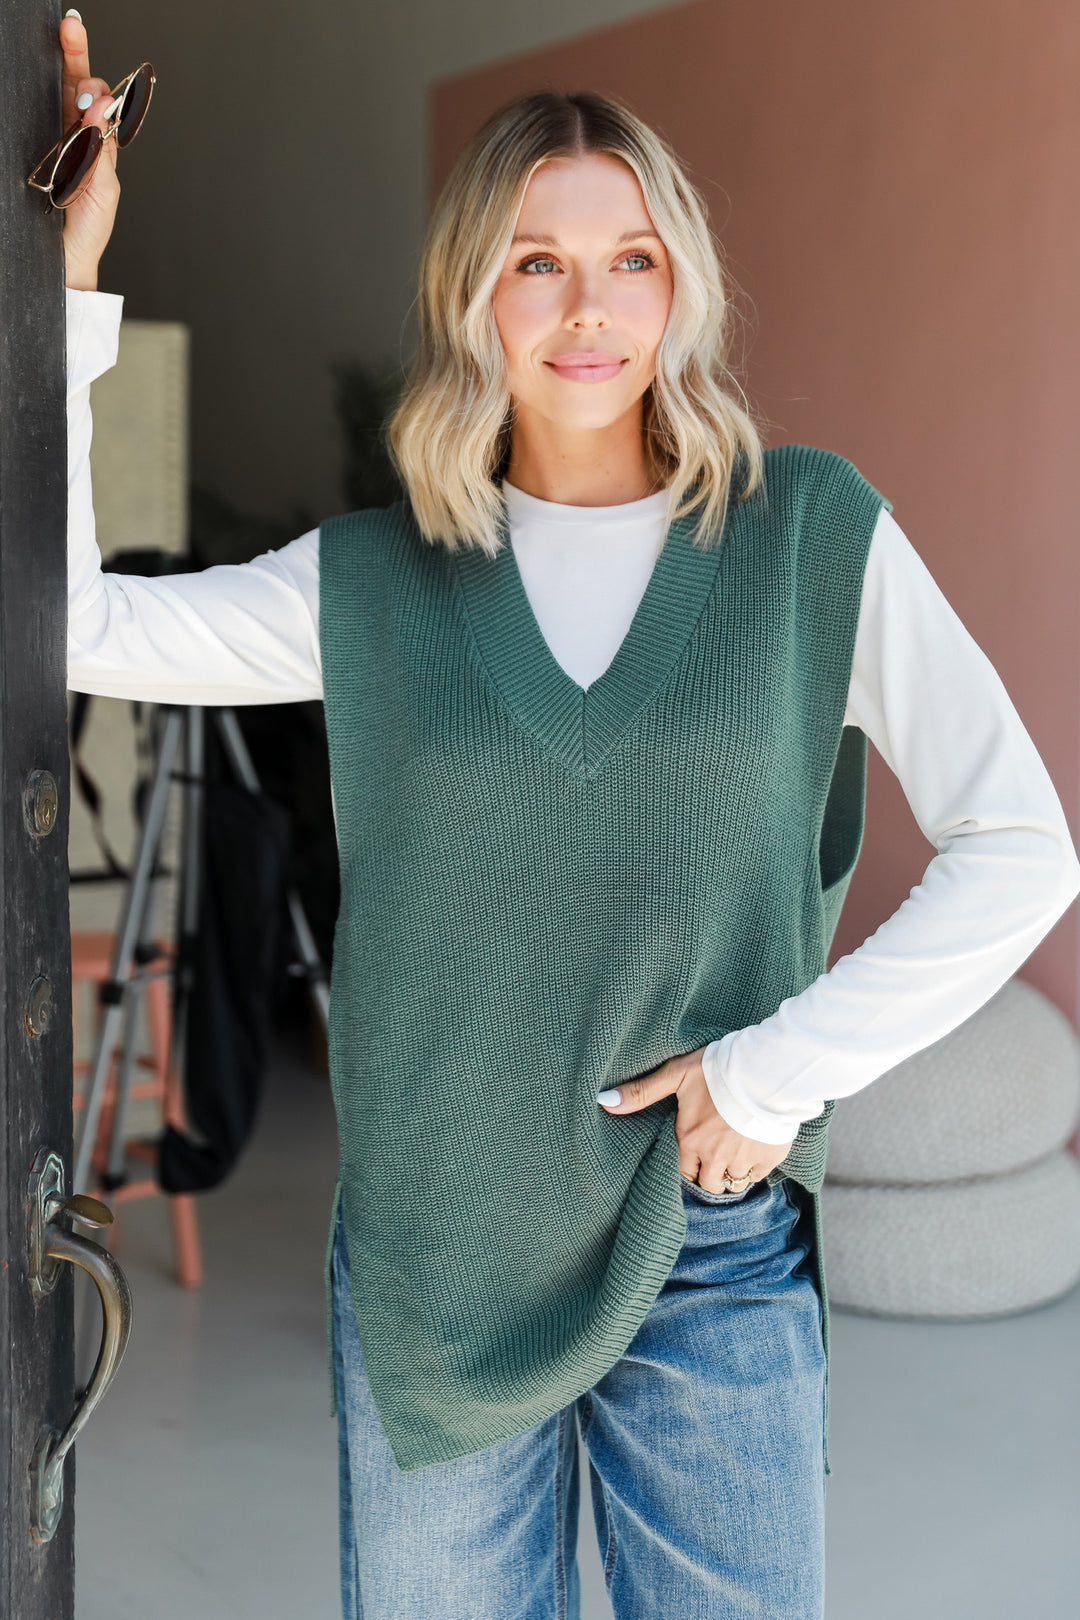 A variety of sweater vests in different colors and styles, showcasing versatile fashion options for fall and beyond.